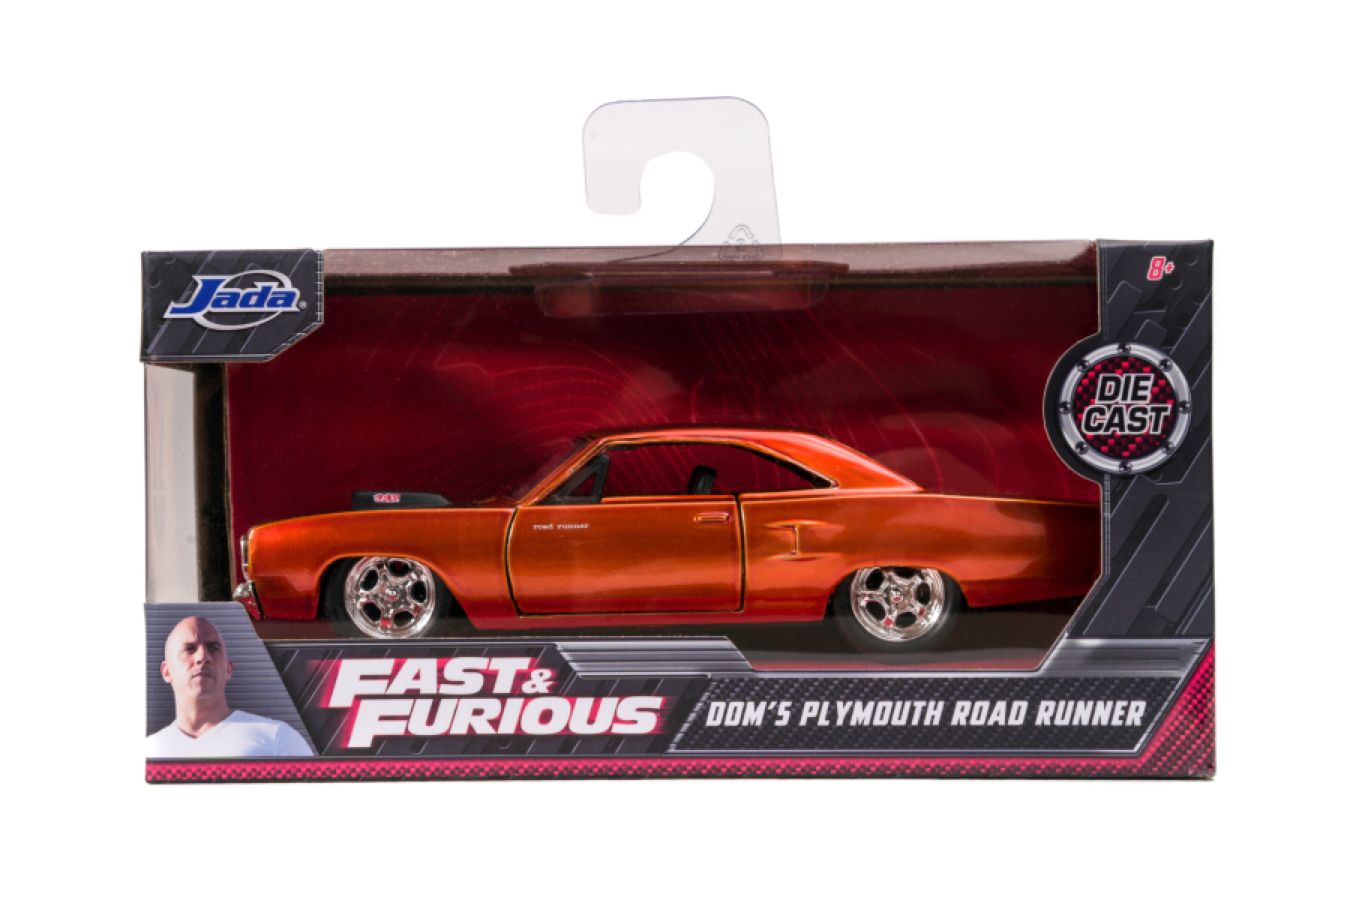 Fast and Furious - 1970 Plymouth Road Runner 1:32 Hollywood Ride